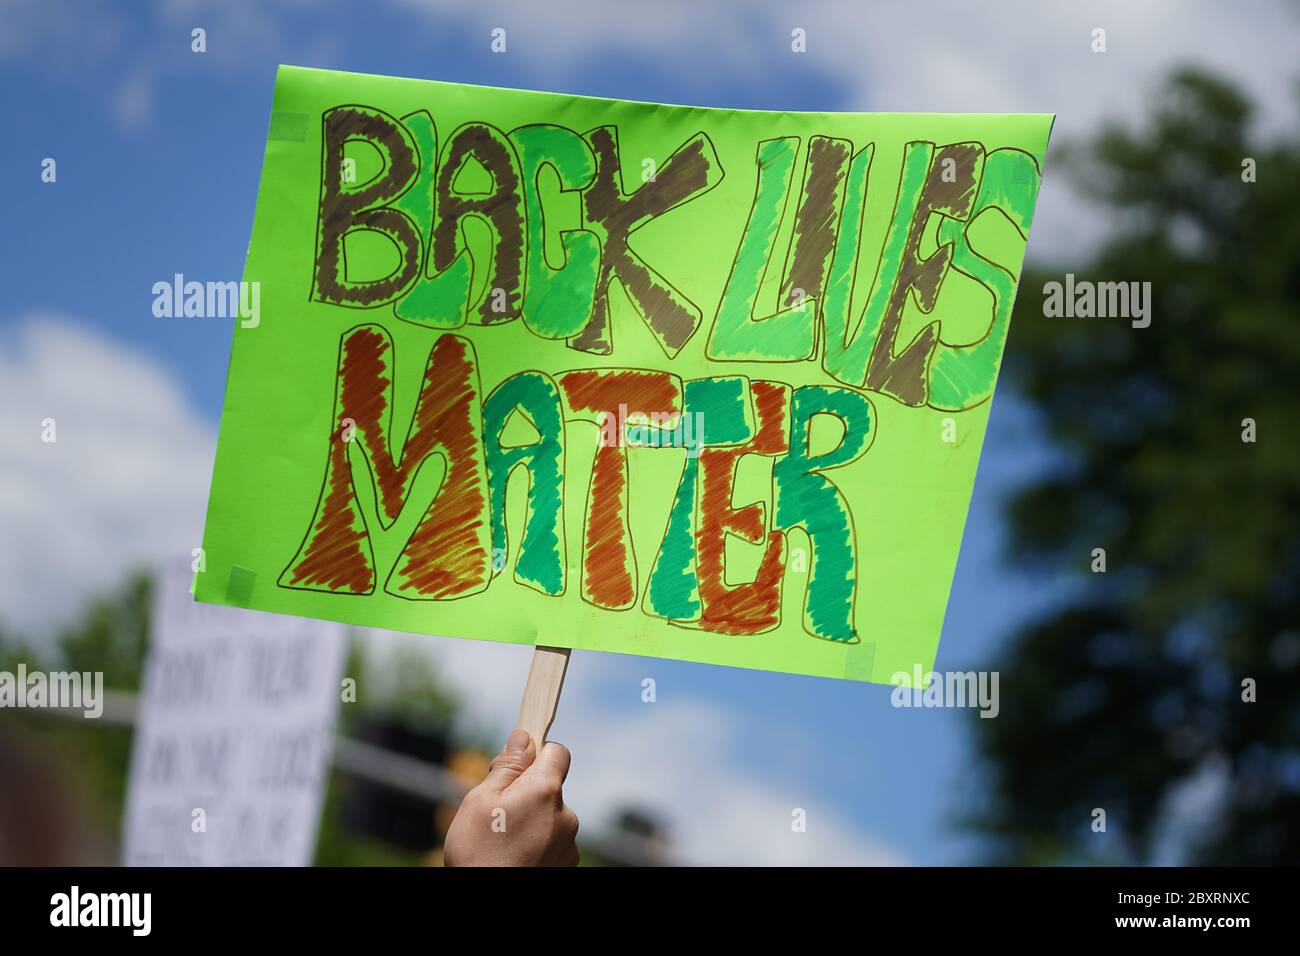 Hundreds of protesters turned out June 7, 2020, for a Black Lives Matter 'Circle of Peace' protest at Centre Square in Easton, Pennsylvania. Stock Photo